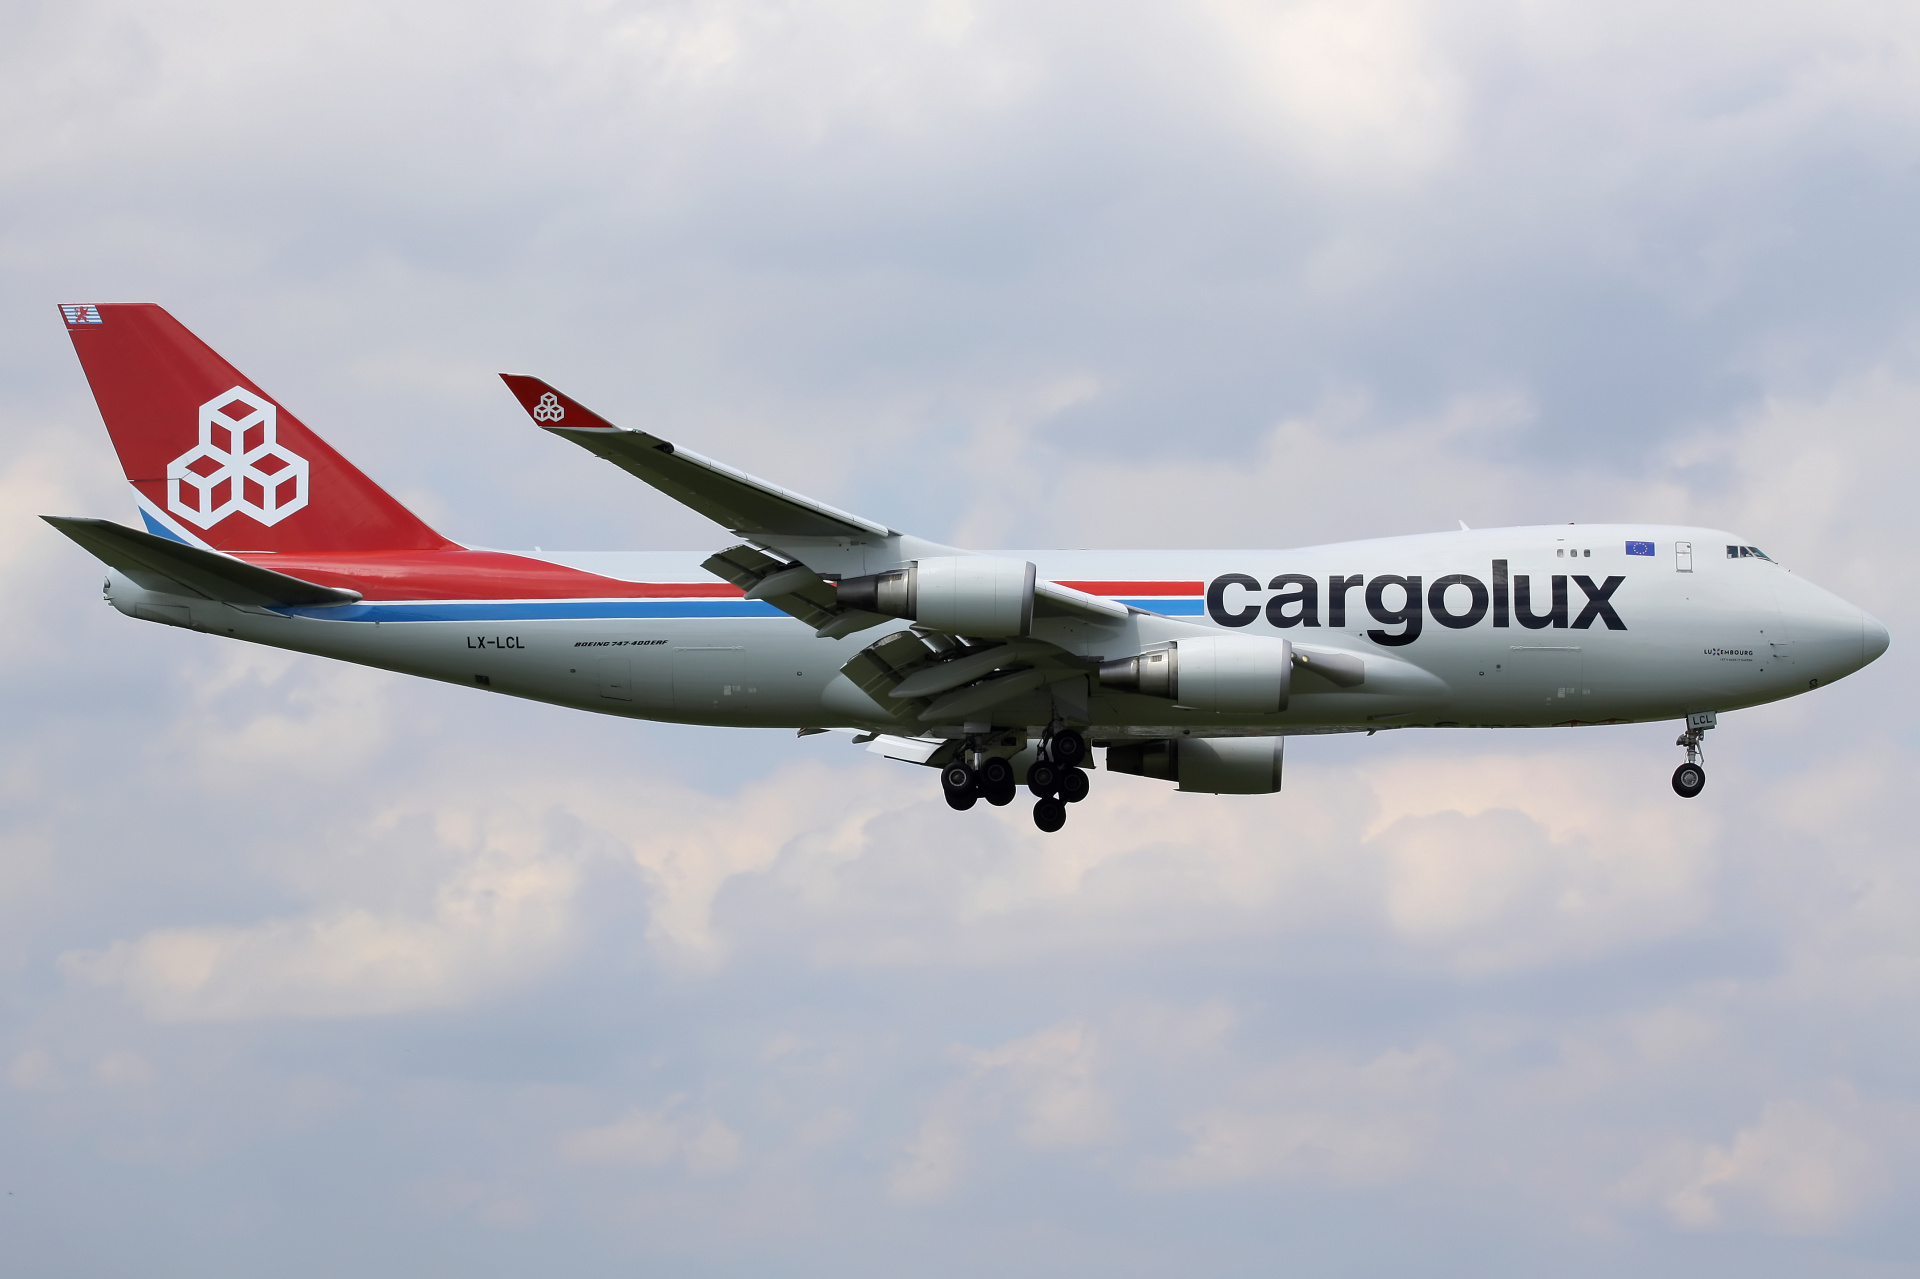 LX-LCL, Cargolux Airlines (Aircraft » Schiphol Spotting » Boeing 747-400F)